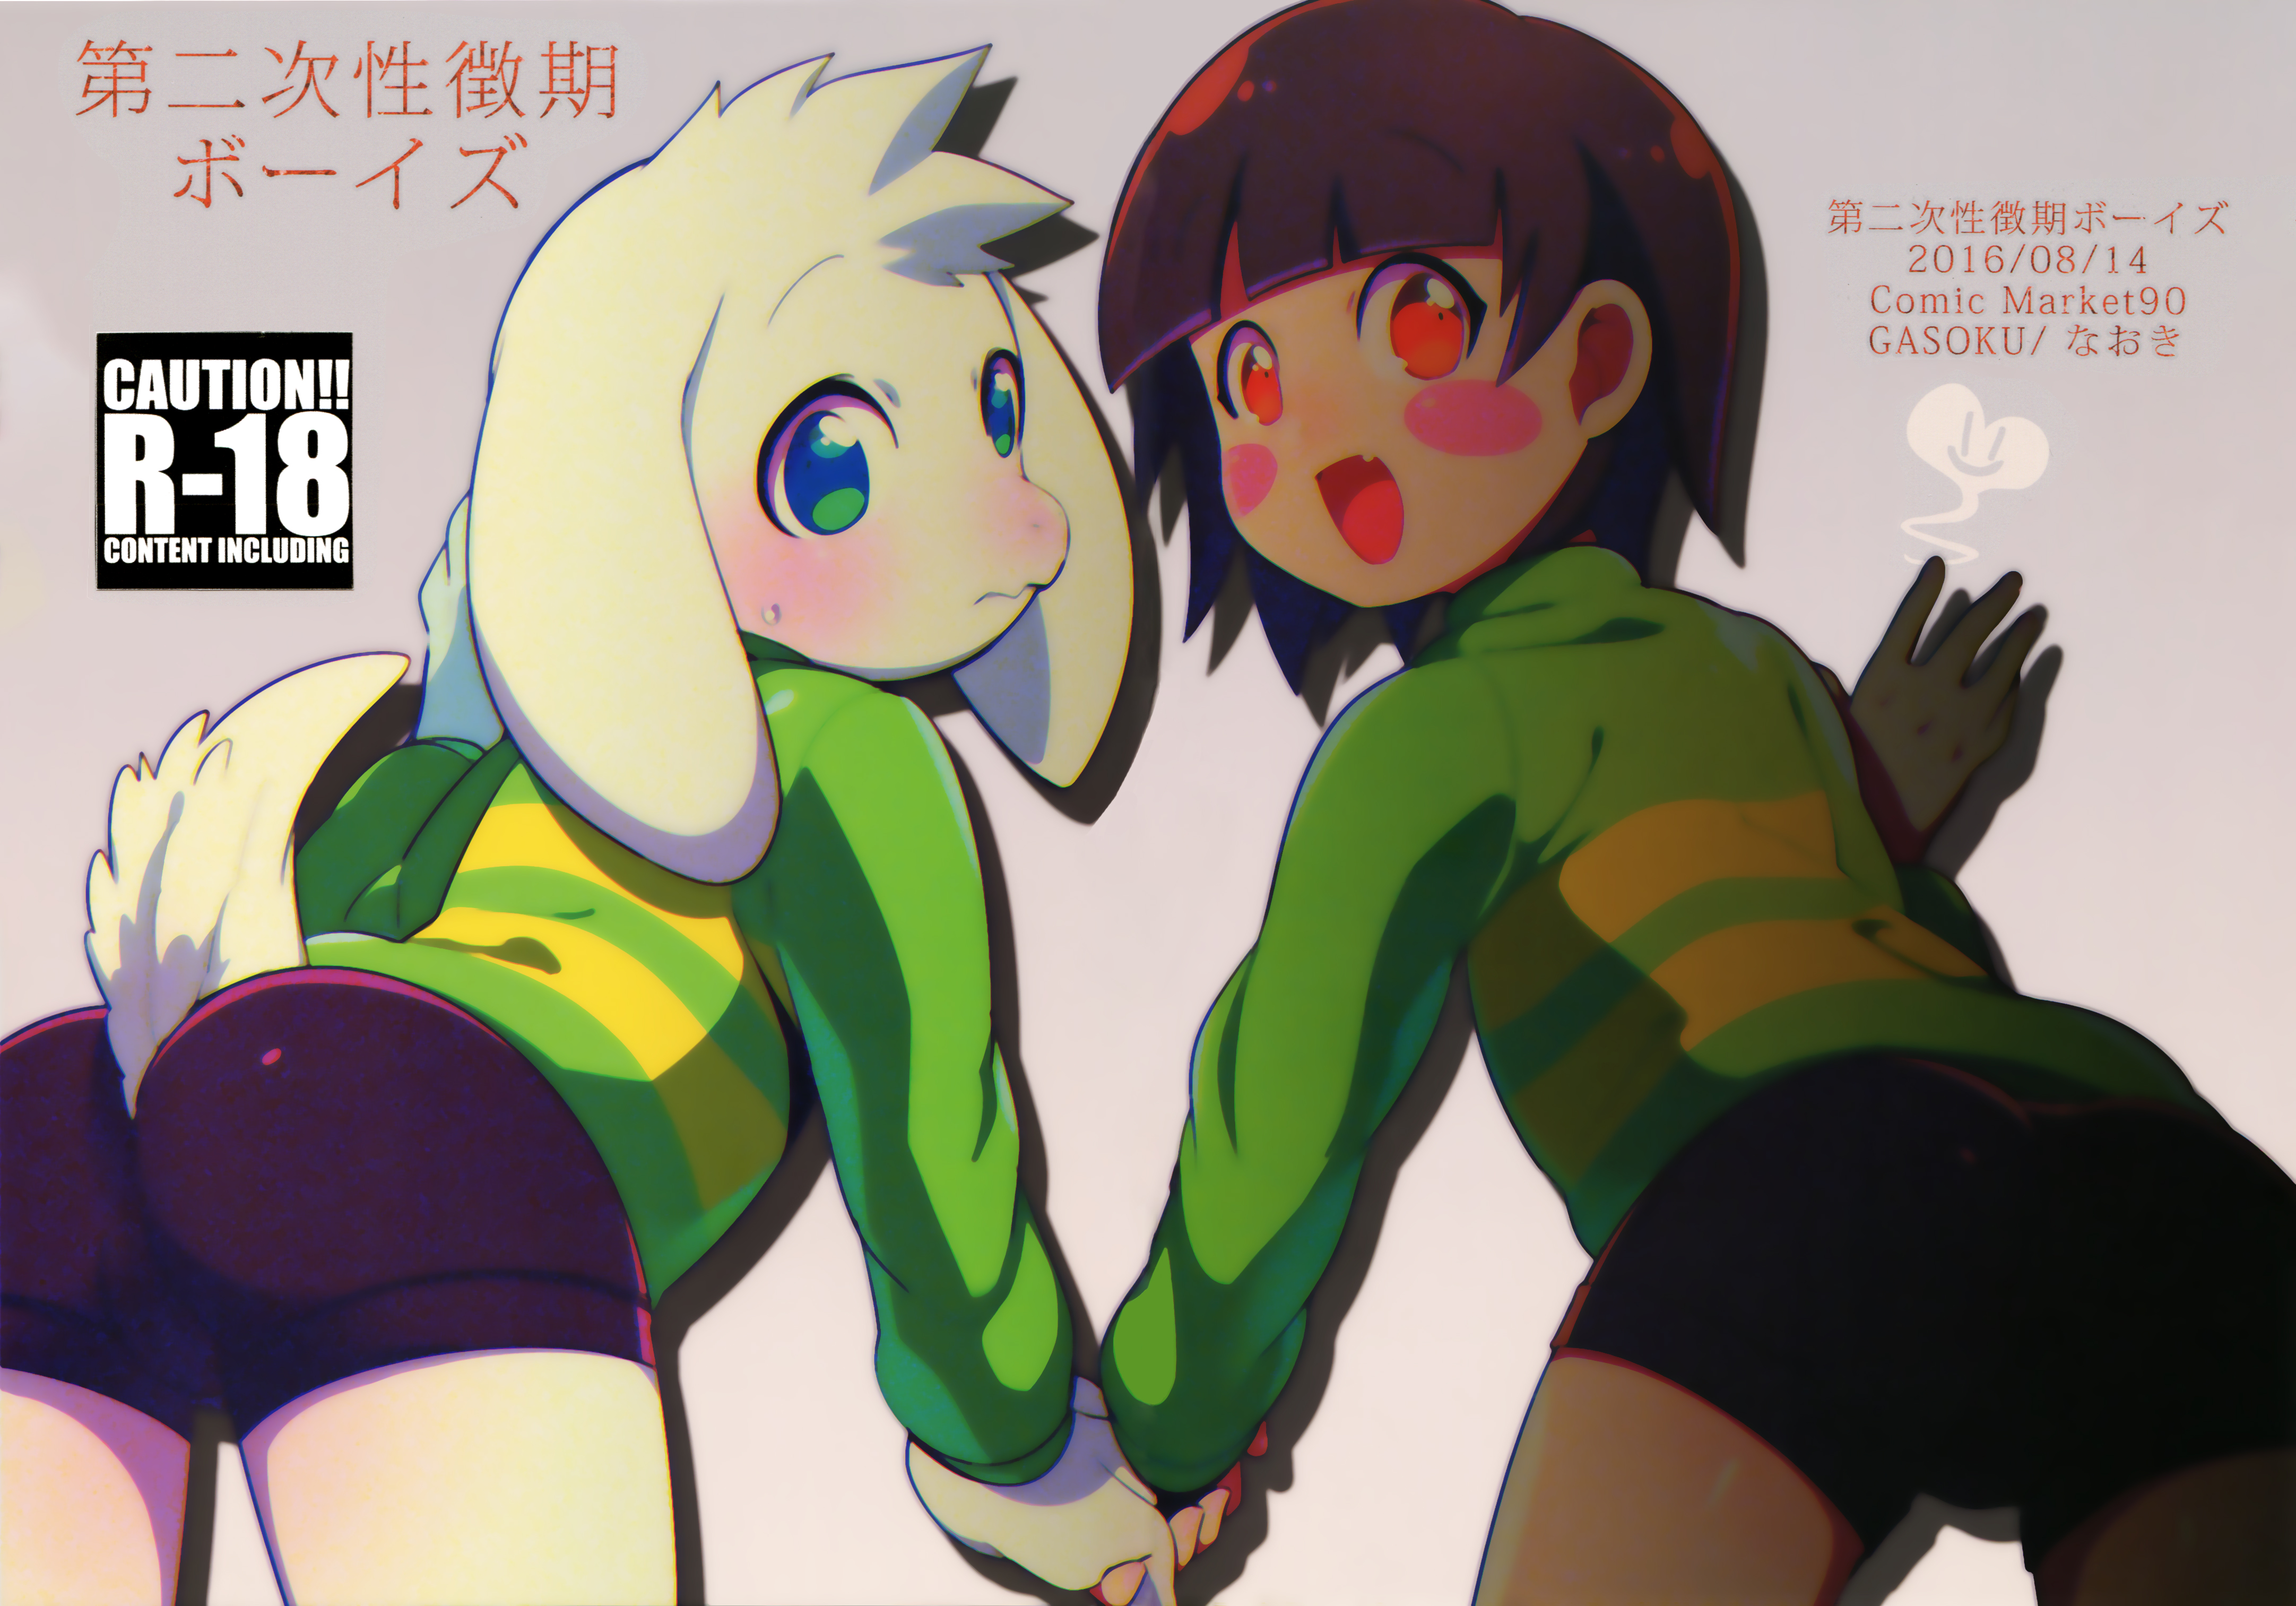 Asriel gives chara good time while